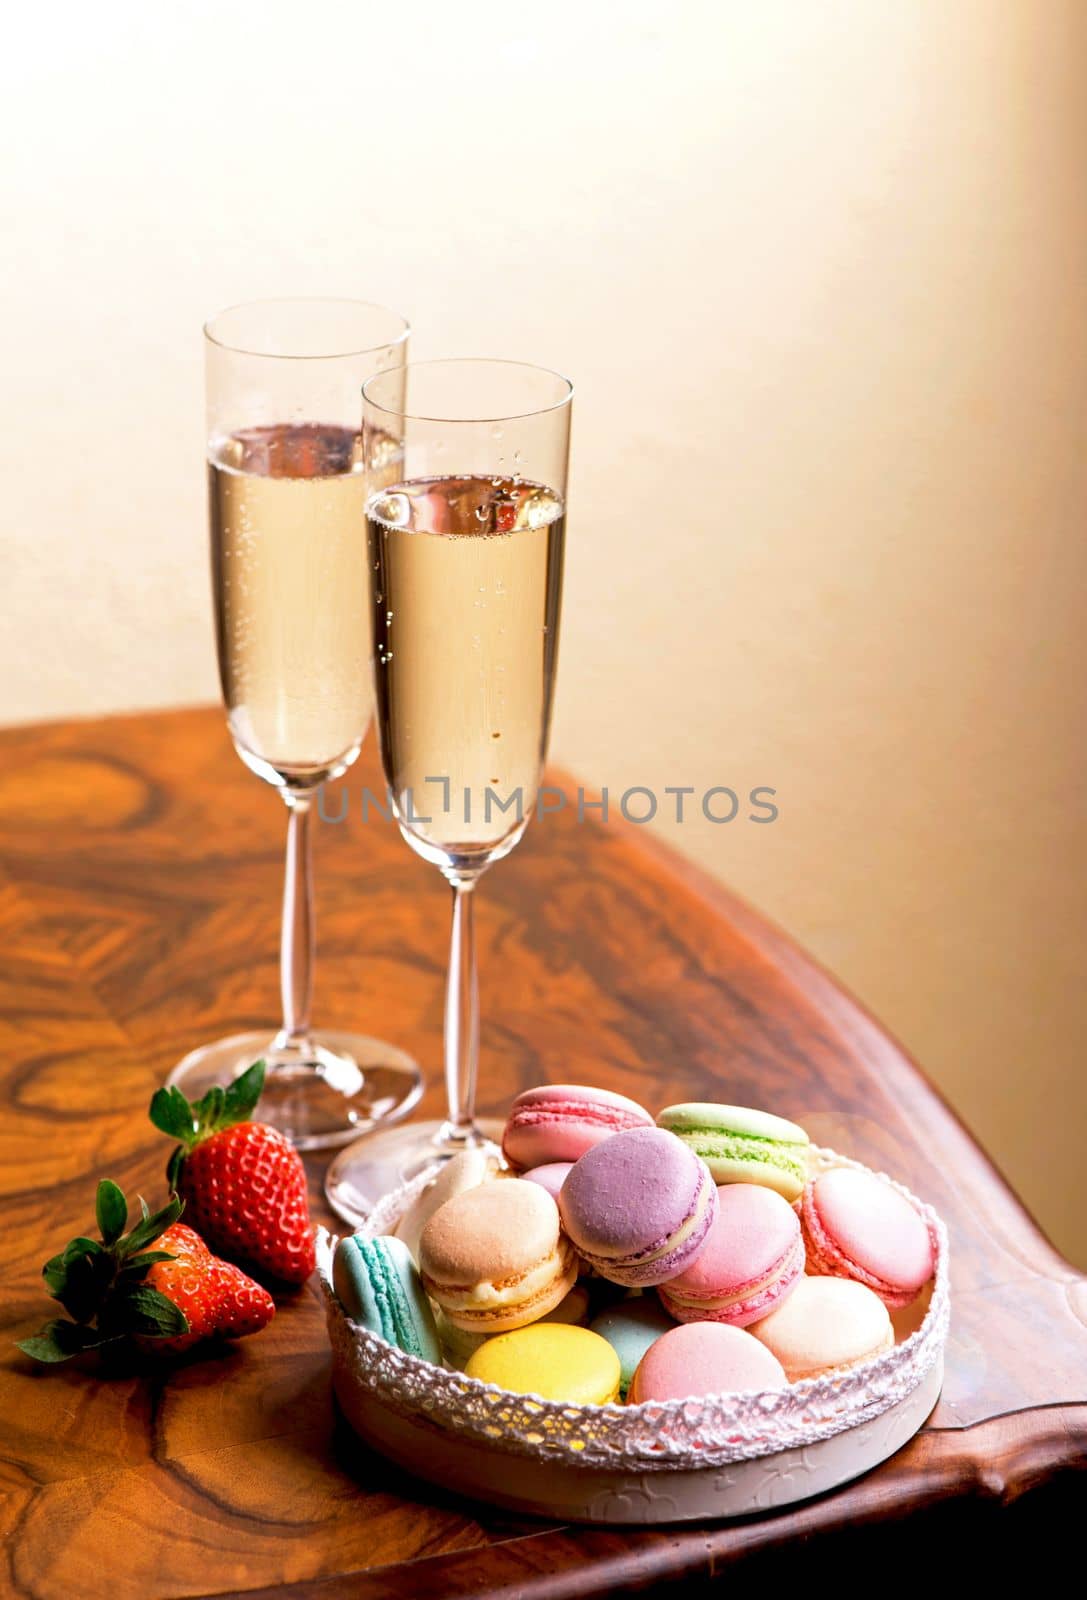 two glasses of champagne and macarons with strawberries on a wooden table by aprilphoto